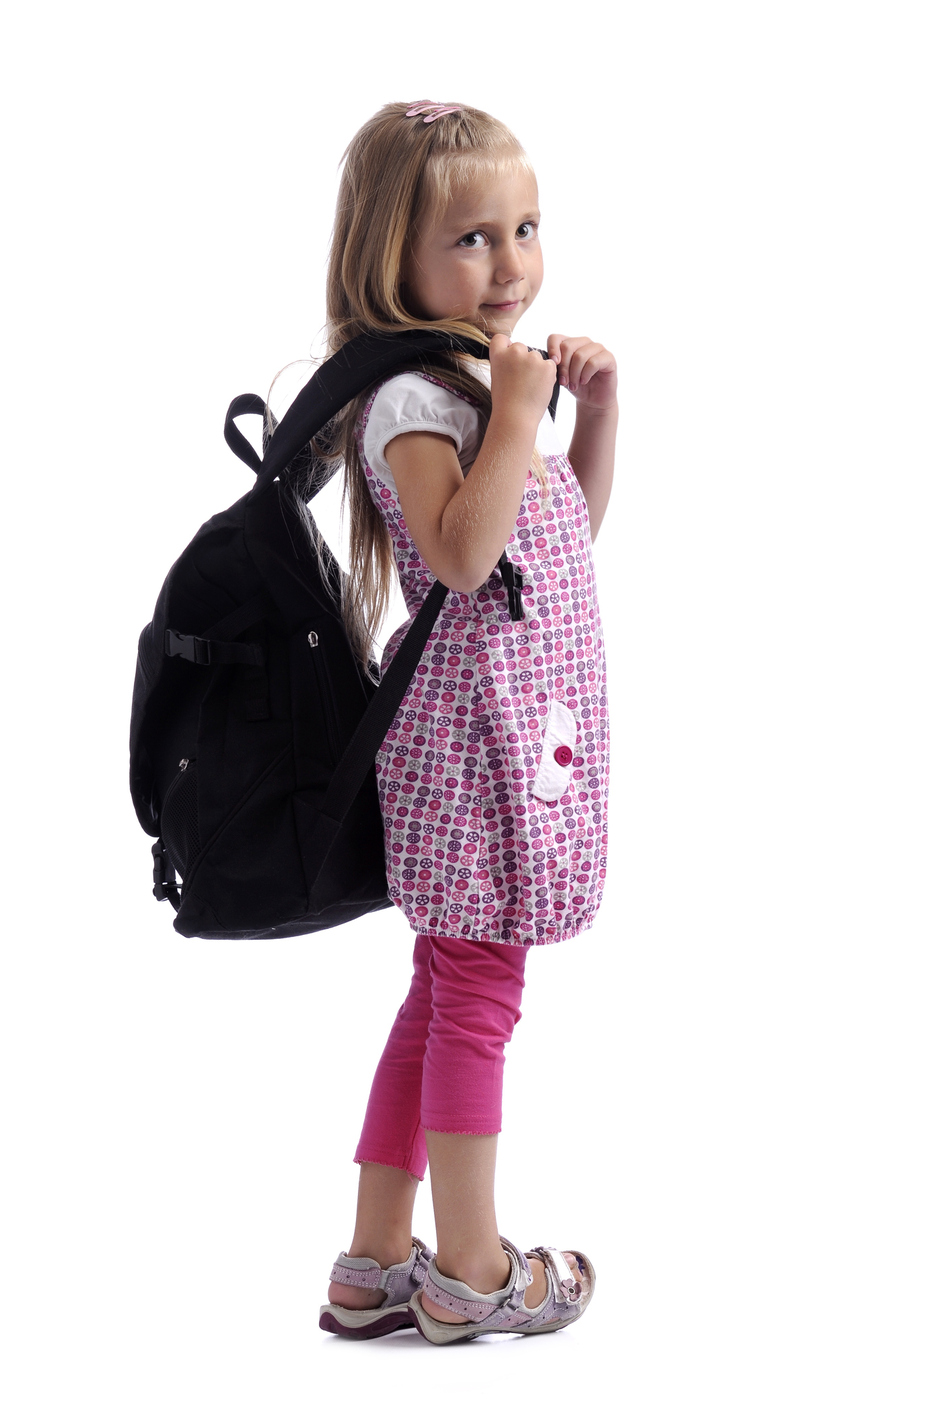 Lighten the Load to Avoid Backpack-related Injuries